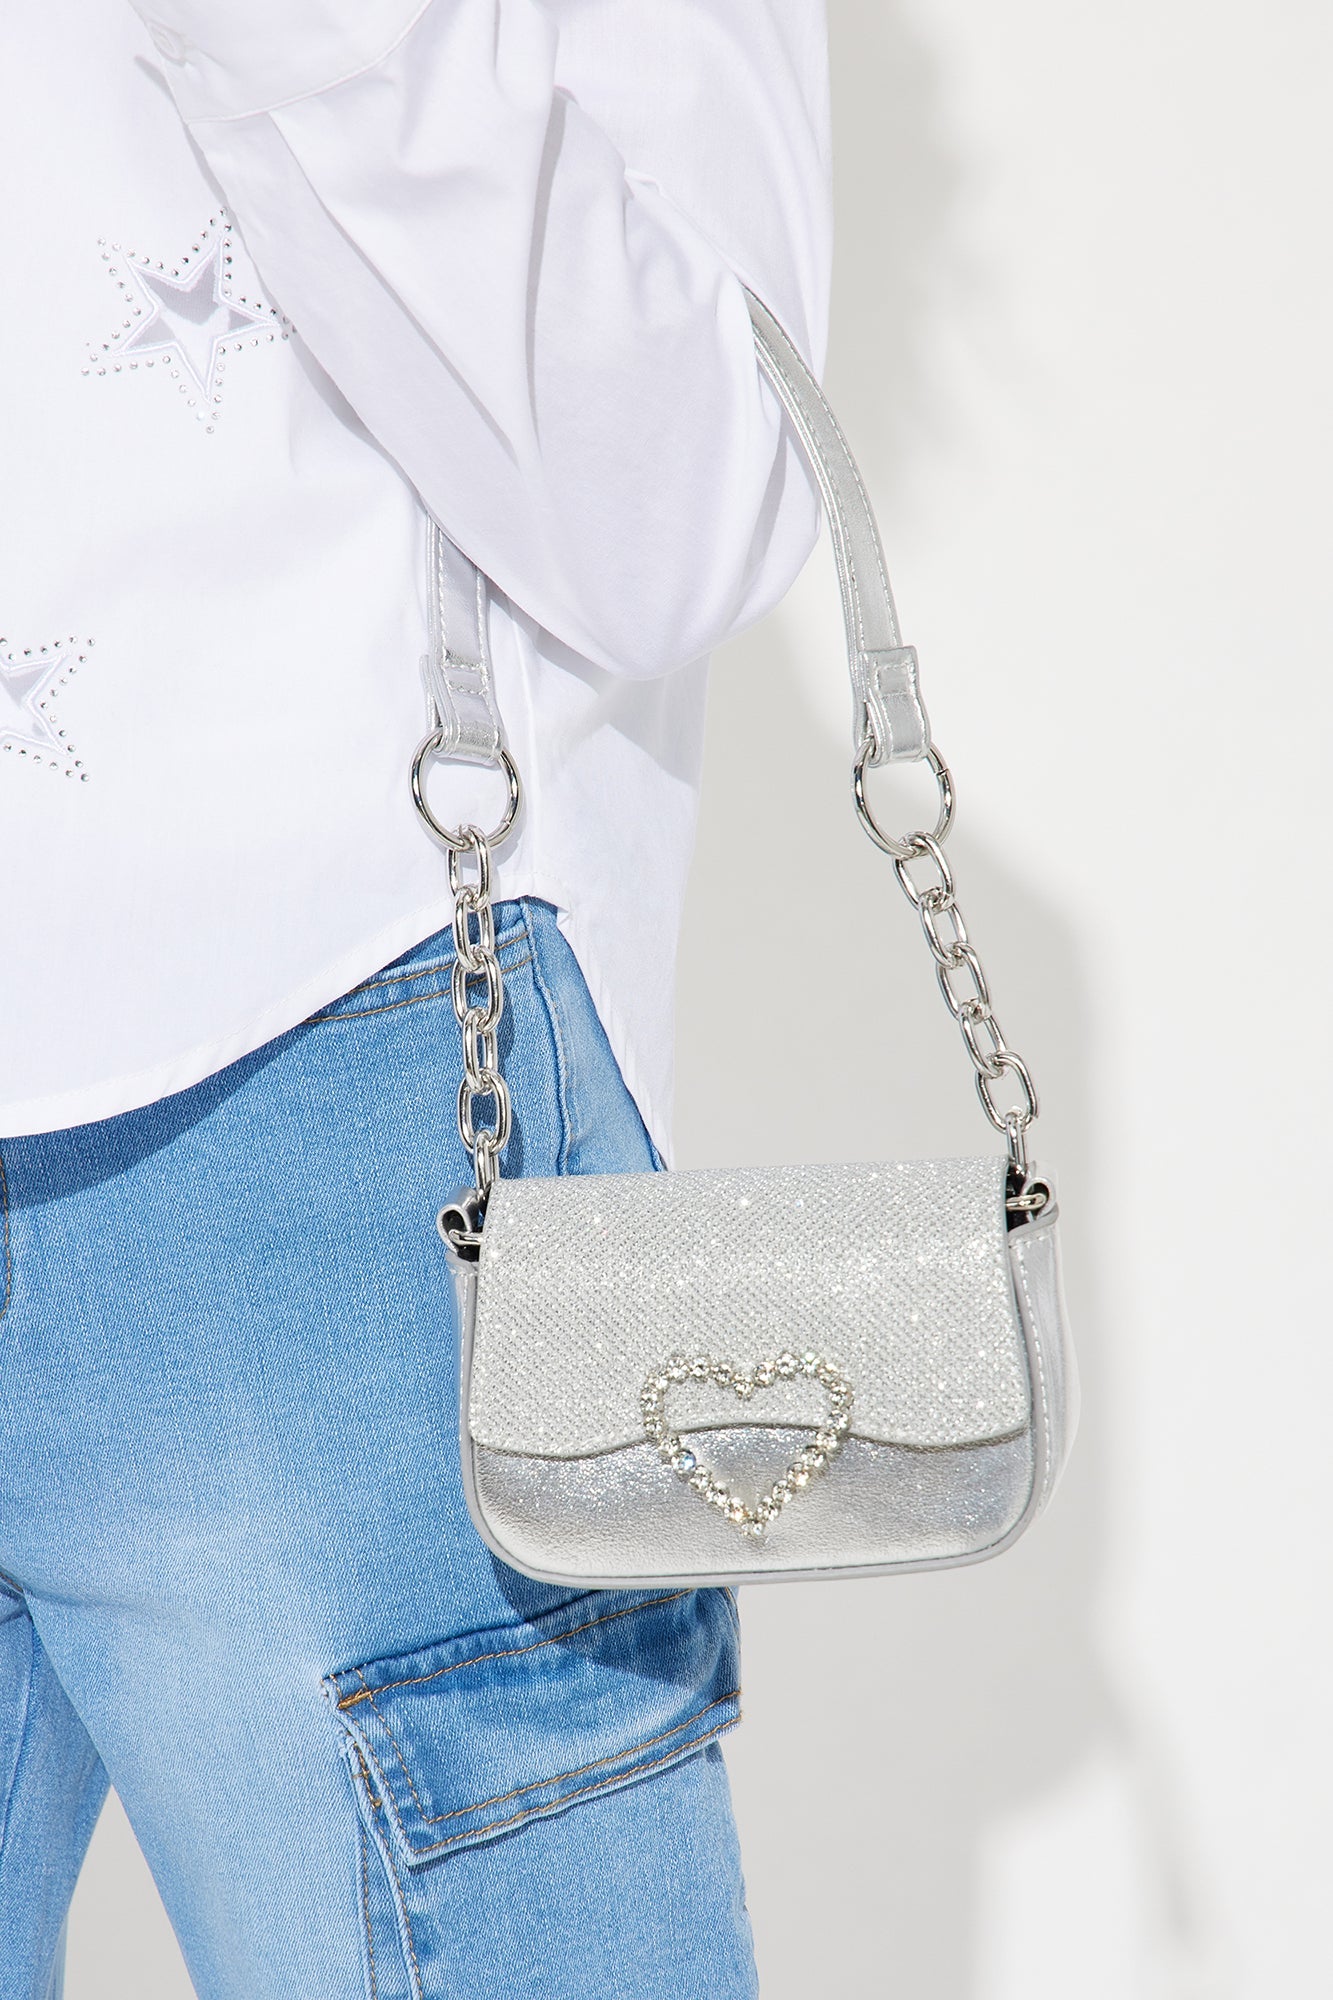 Shine Bright with the Mini Special to You Handbag in Silver